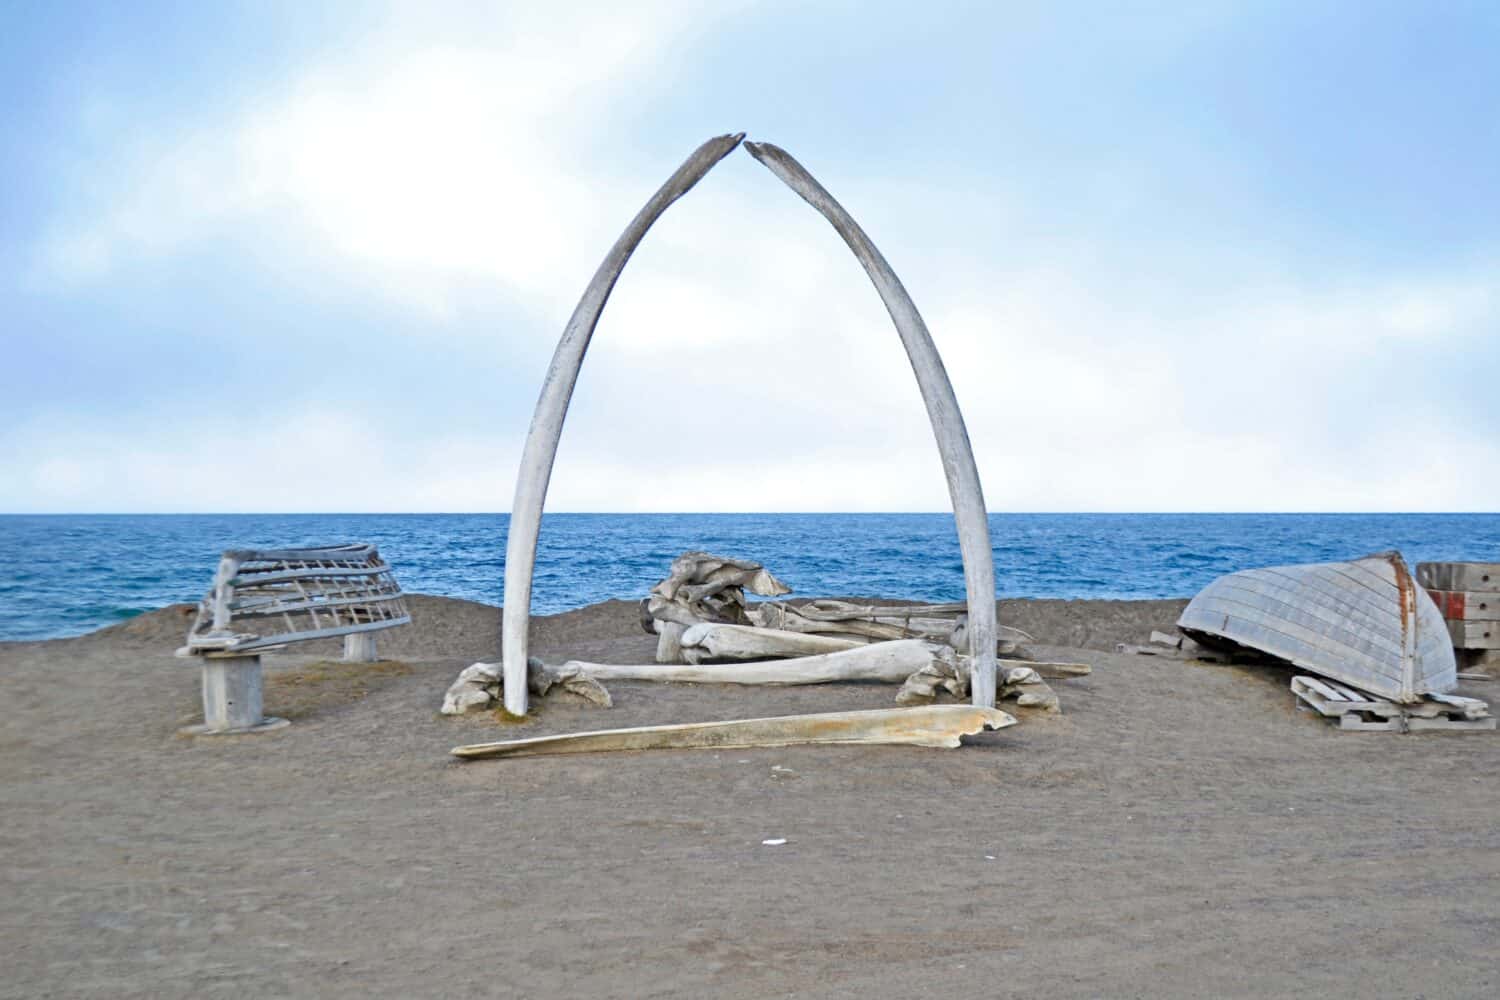 Whale bone arch in Utqiagvik, Alaska at the edge of the Arctic Ocean. Referred to as the "Gateway to the Arctic", it symbolizes the community's relationship to the sea and whaling.